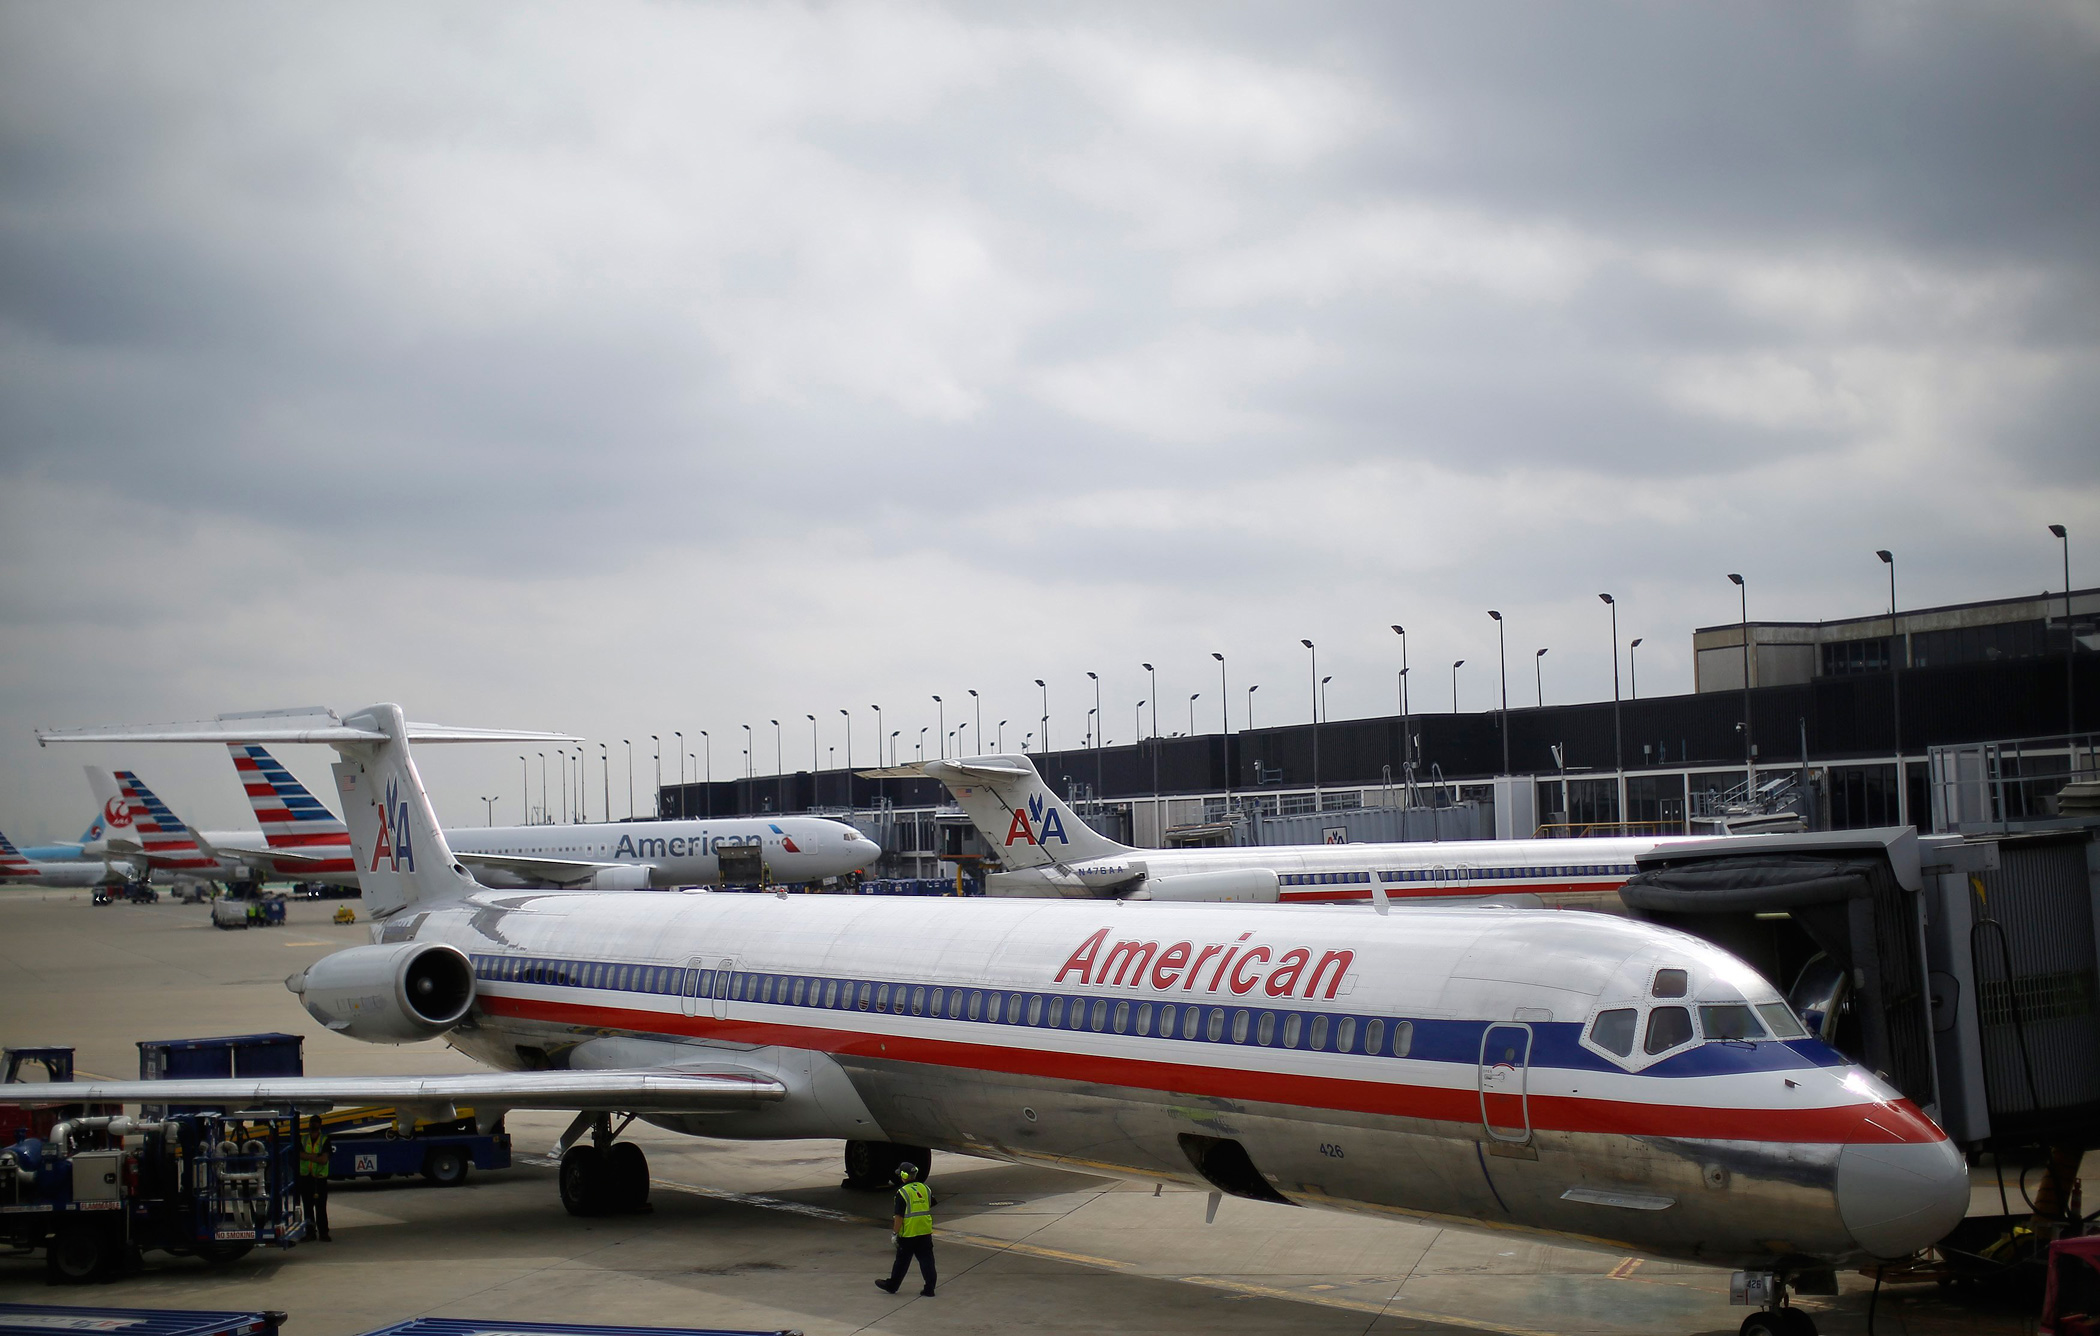 An American Airlines airplane sits at a gate at the O'Hare Airport on Oct. 2, 2014 in Chicago. (Jim Young—Reuters)